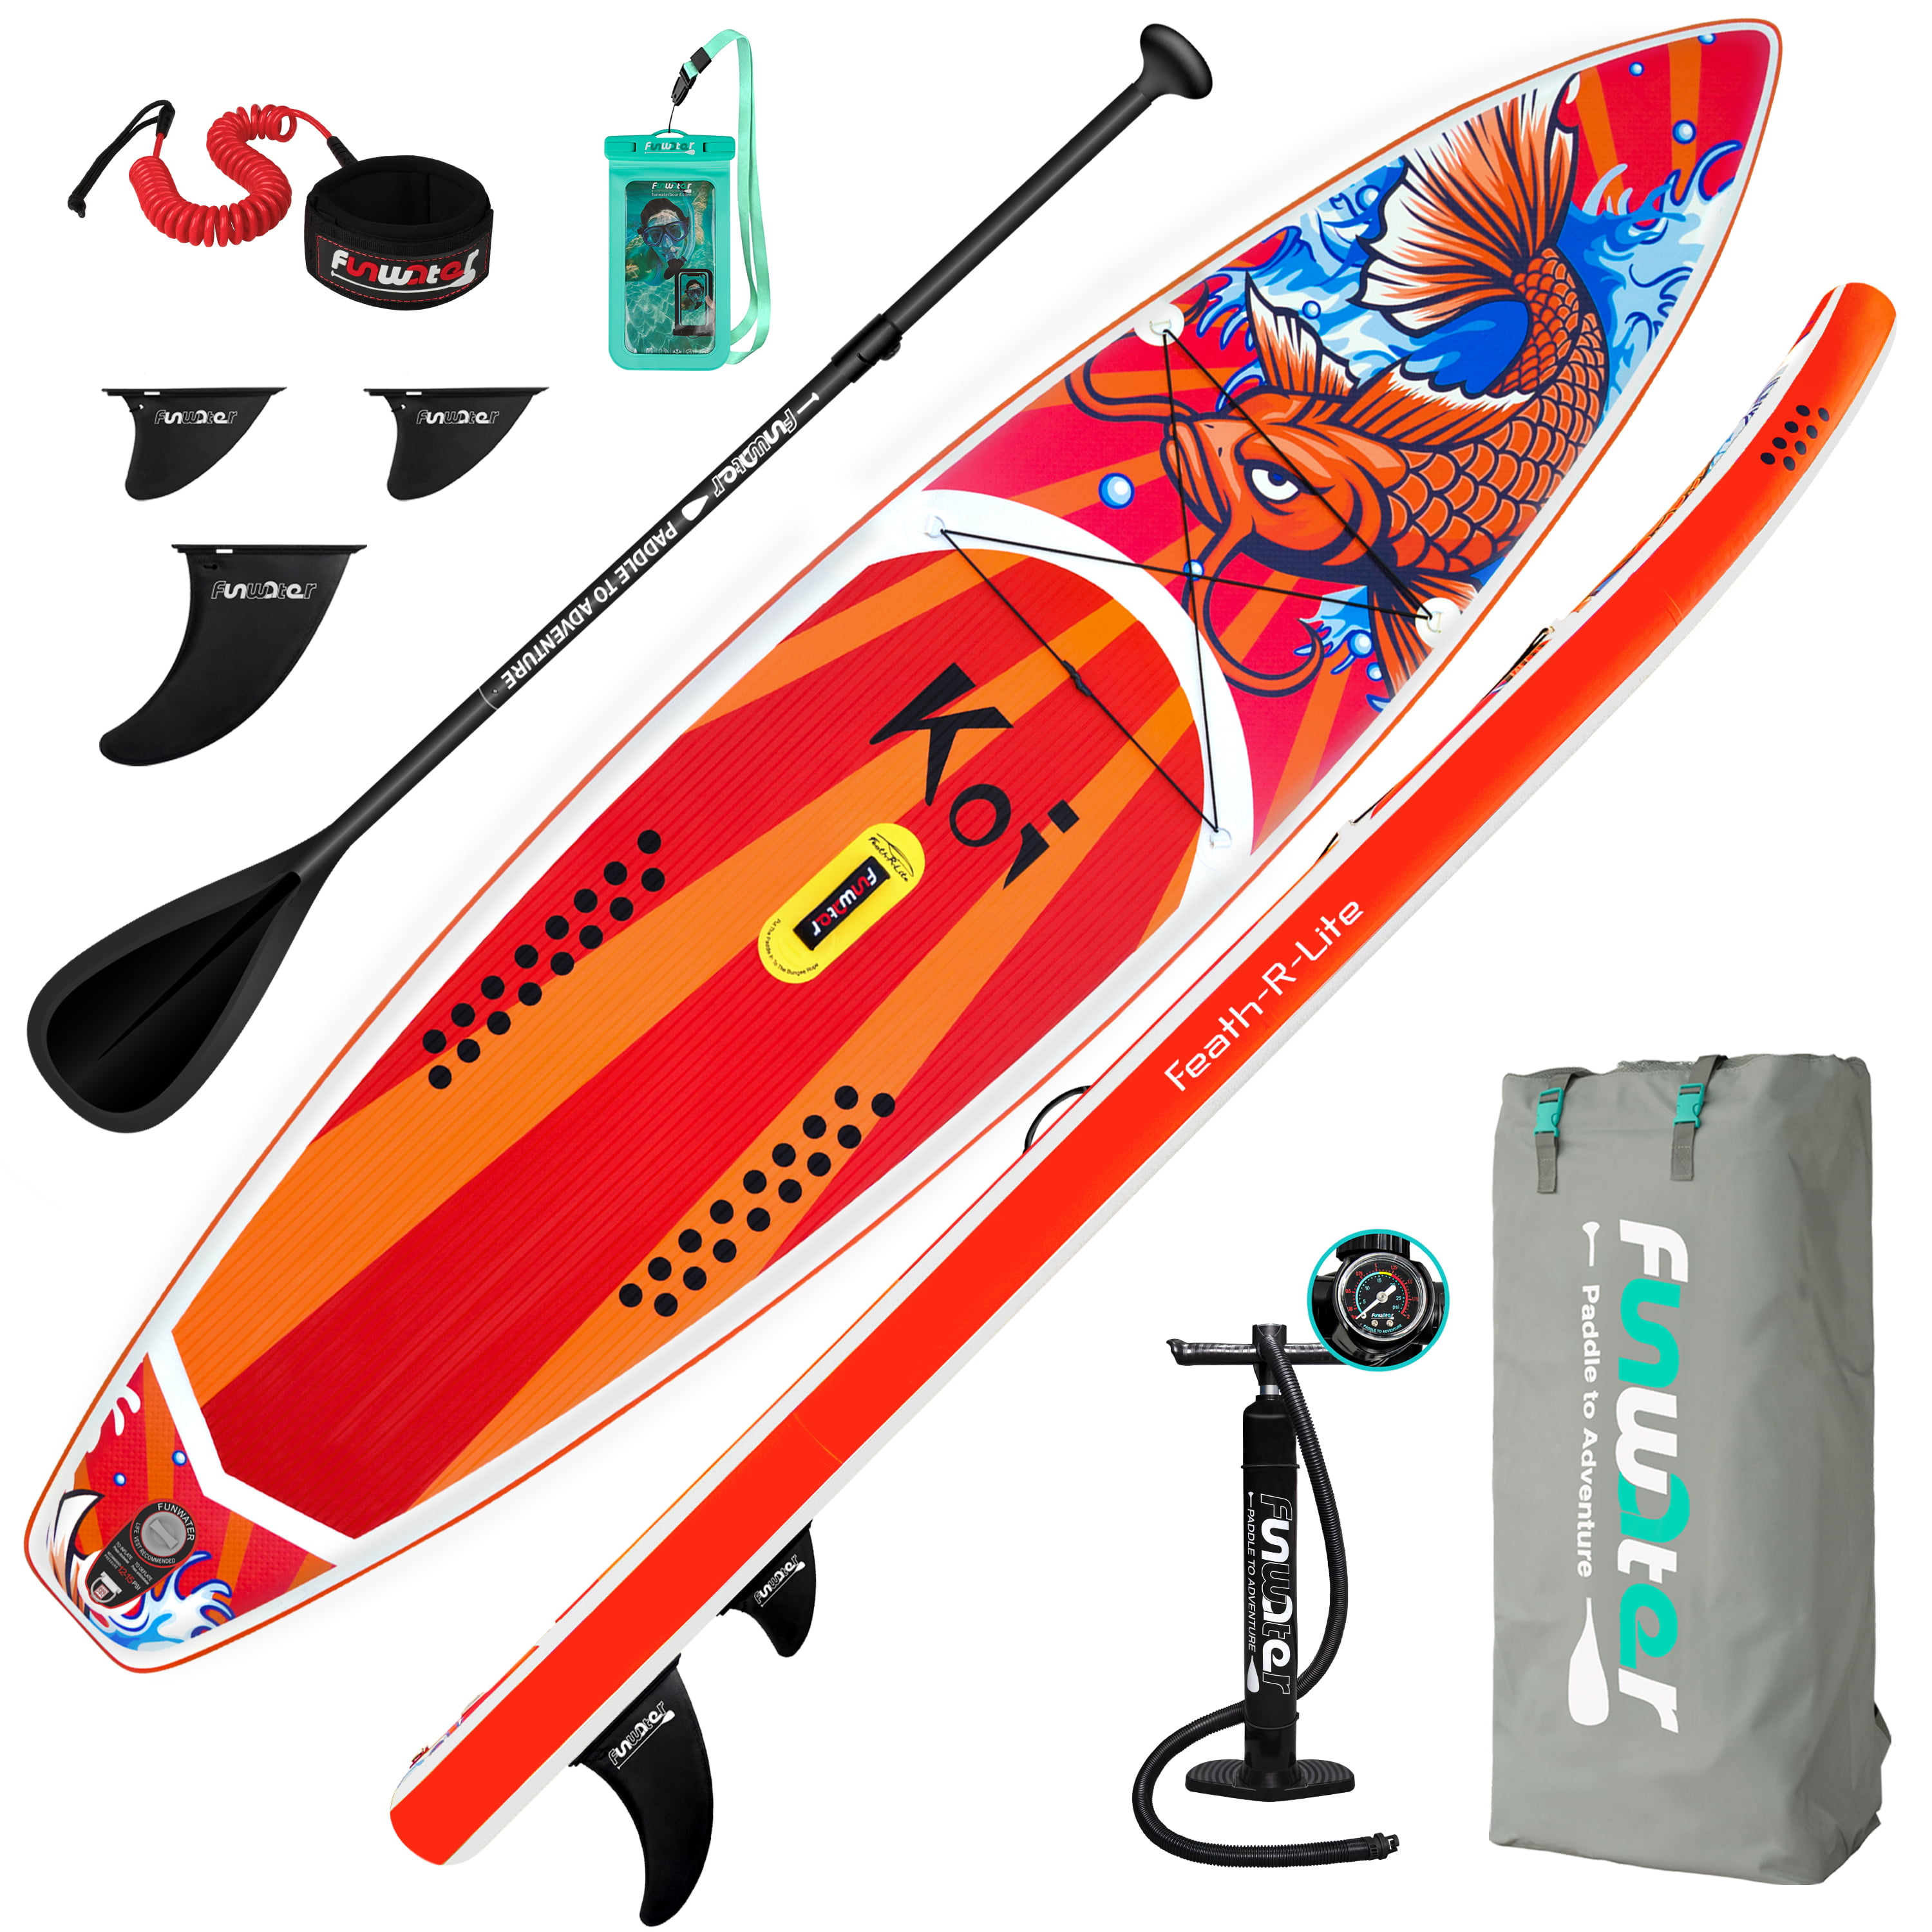 320*76*15cm Pump Waterproof Bag ISUP Travel Backpack Feath-R-Lite Aufblasbare Stand Up Paddle Board Surfbrett SUP Complete Inflatable Paddleboard Accessories Adjustable Paddling Lead 